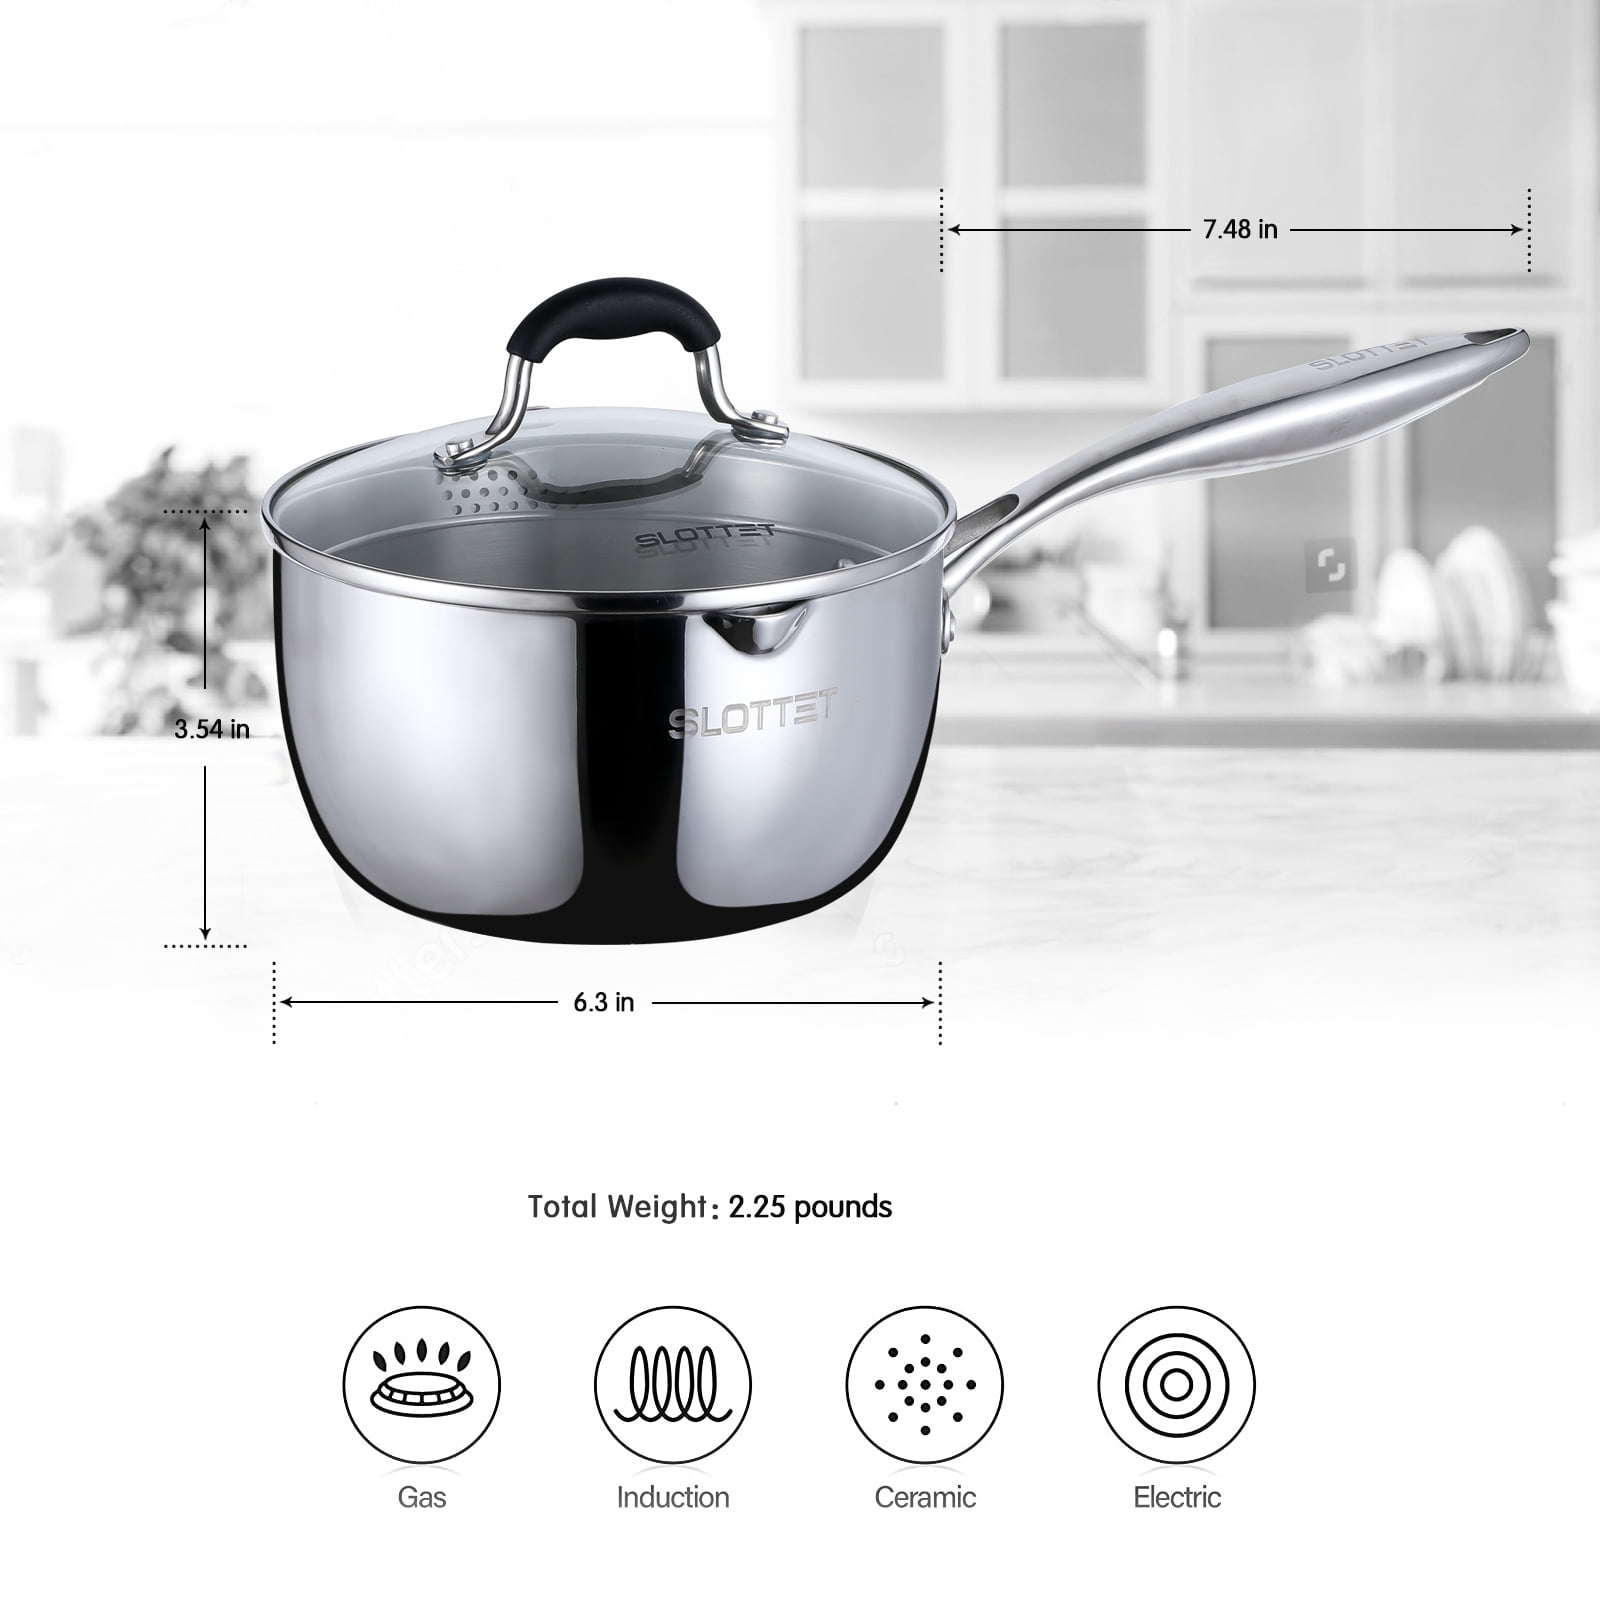 Stainless Steel Saucepan with Pour Spout, 1.5 Quart Induction Saucepan,  Capsule Bottom Steel Saucepan, Sauce Pan with Glass Lid, Imitation Wood 